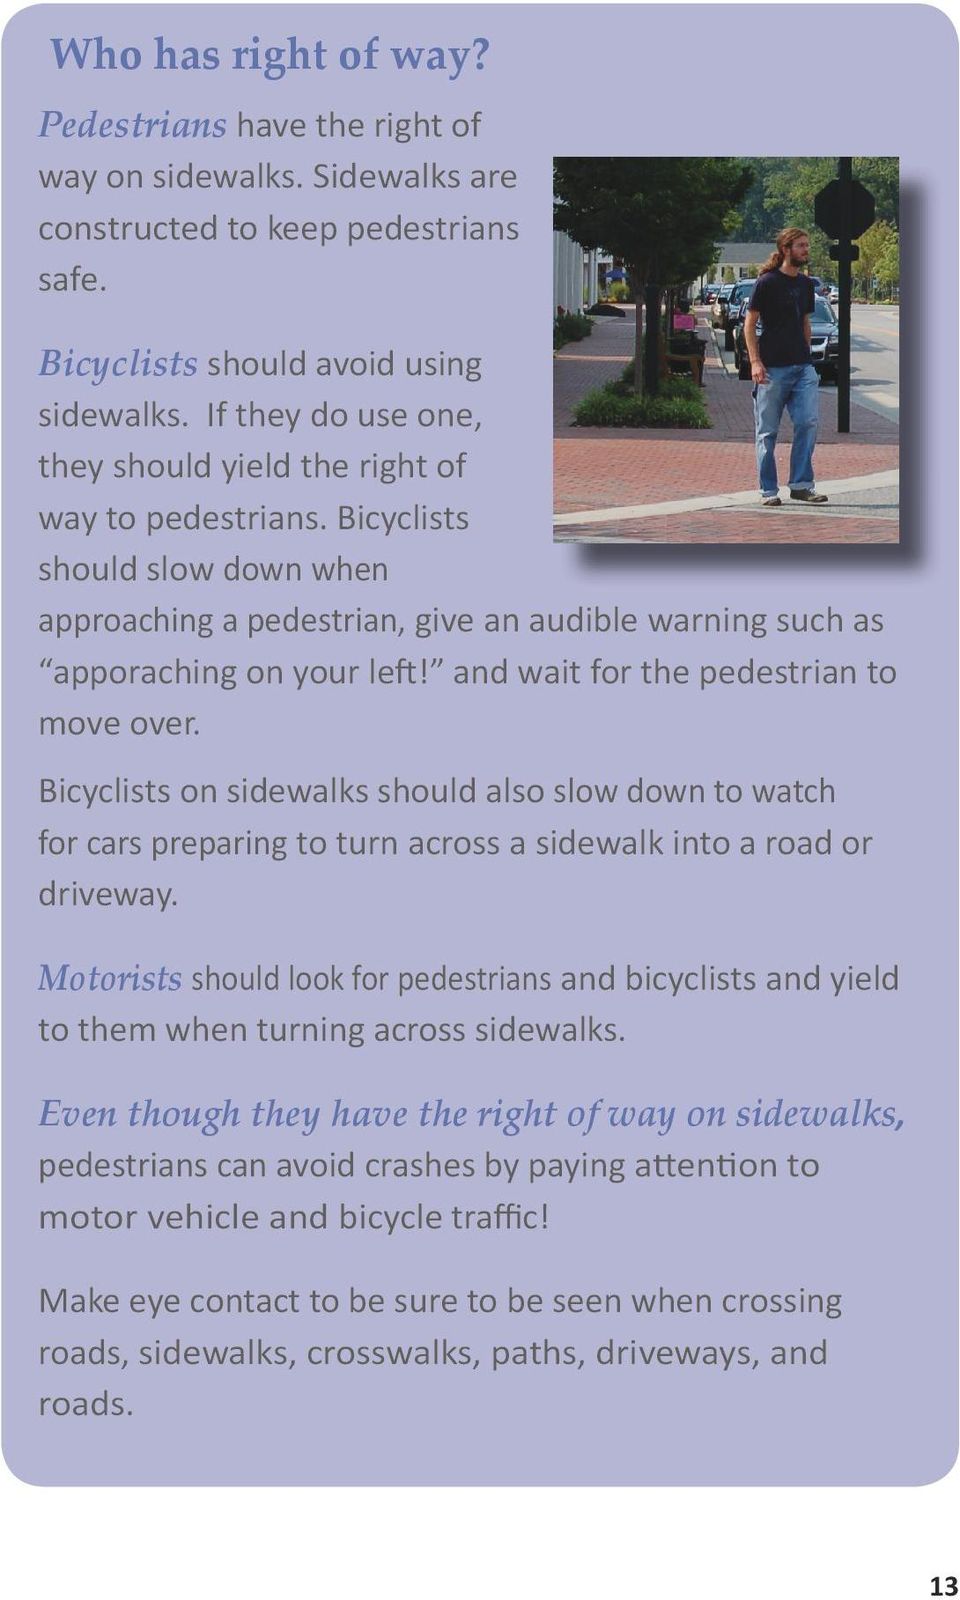 and wait for the pedestrian to move over. Bicyclists on sidewalks should also slow down to watch for cars preparing to turn across a sidewalk into a road or driveway.